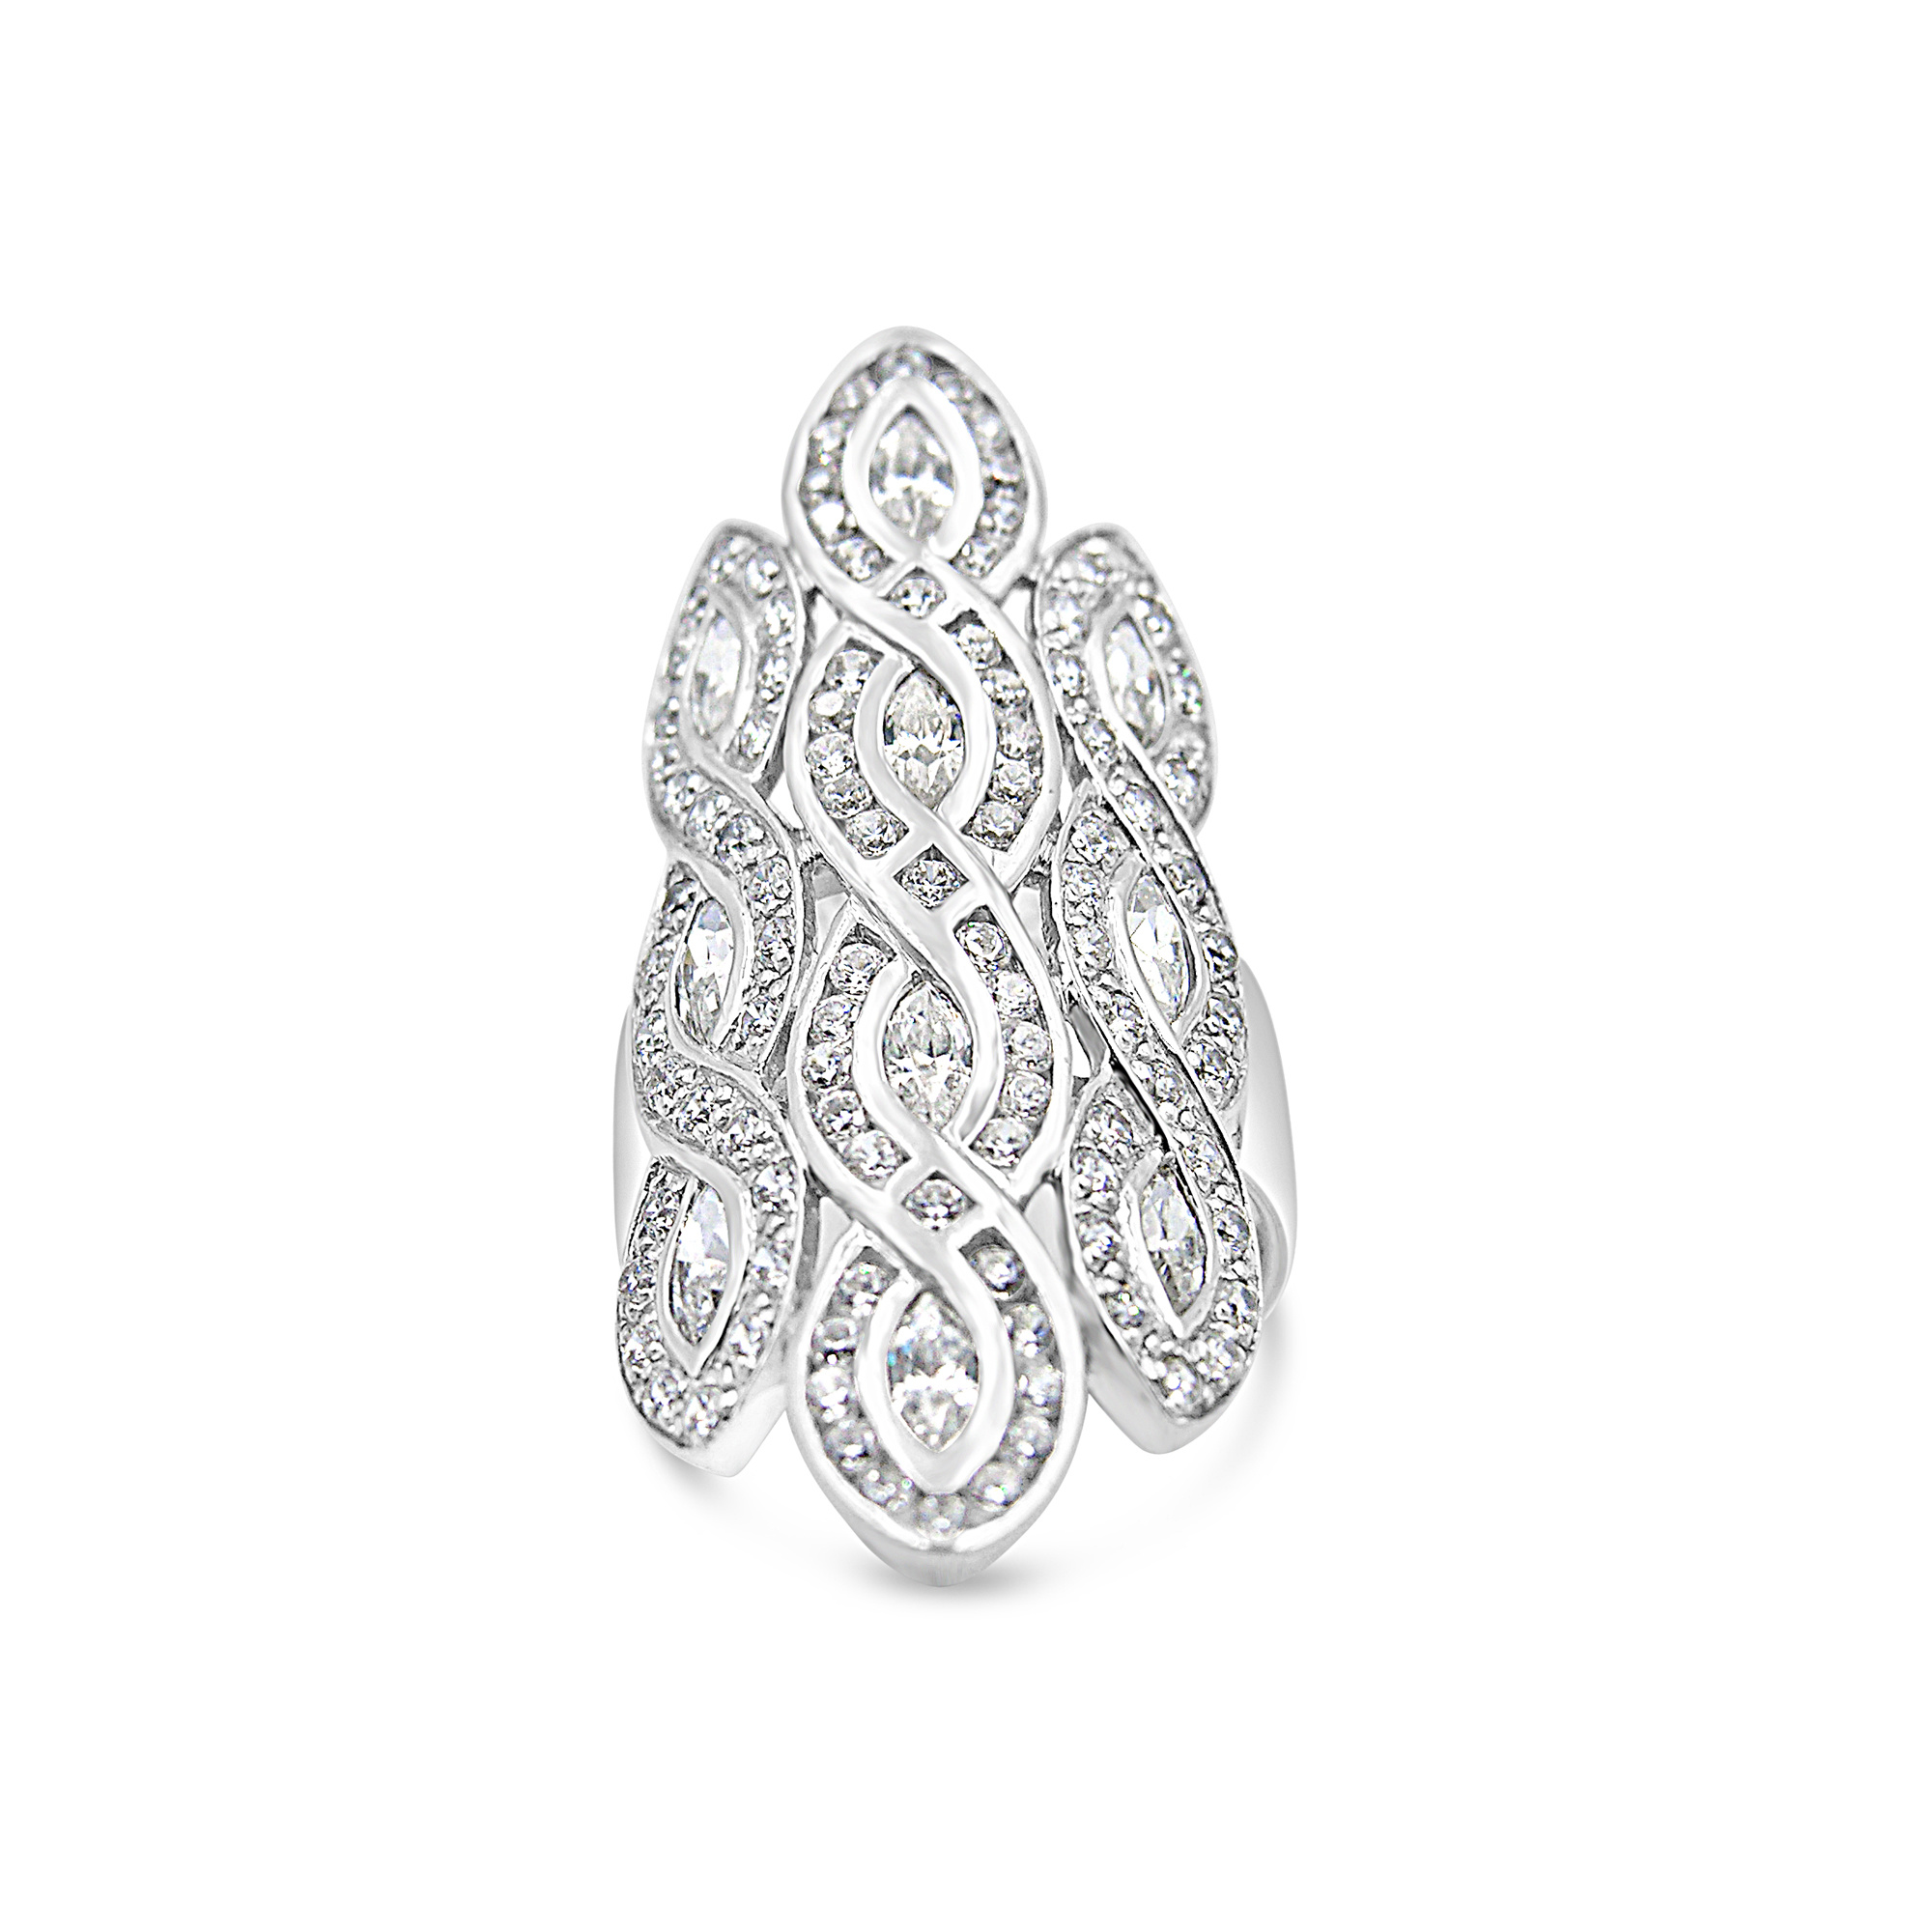 Elini 18kt white gold ring with zirconia